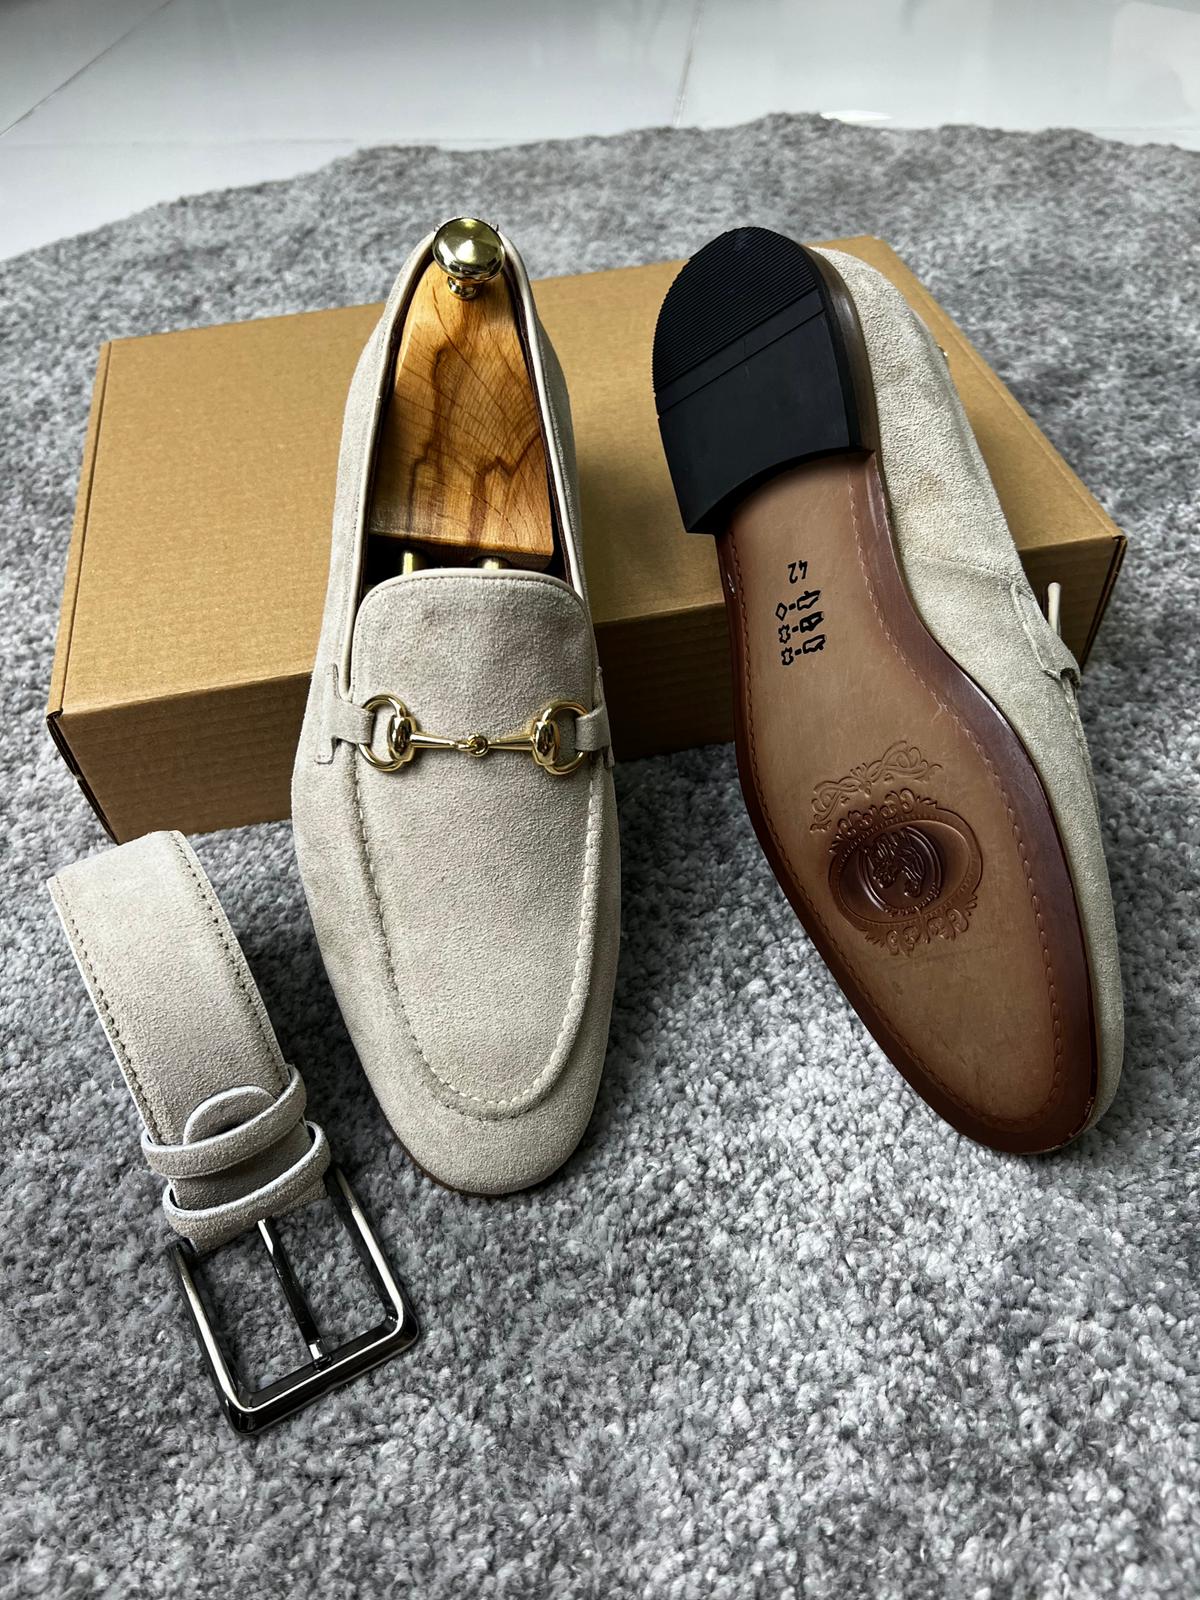 Bojoni Amato Special Edition Neolite Suede Beige Leather Loafer